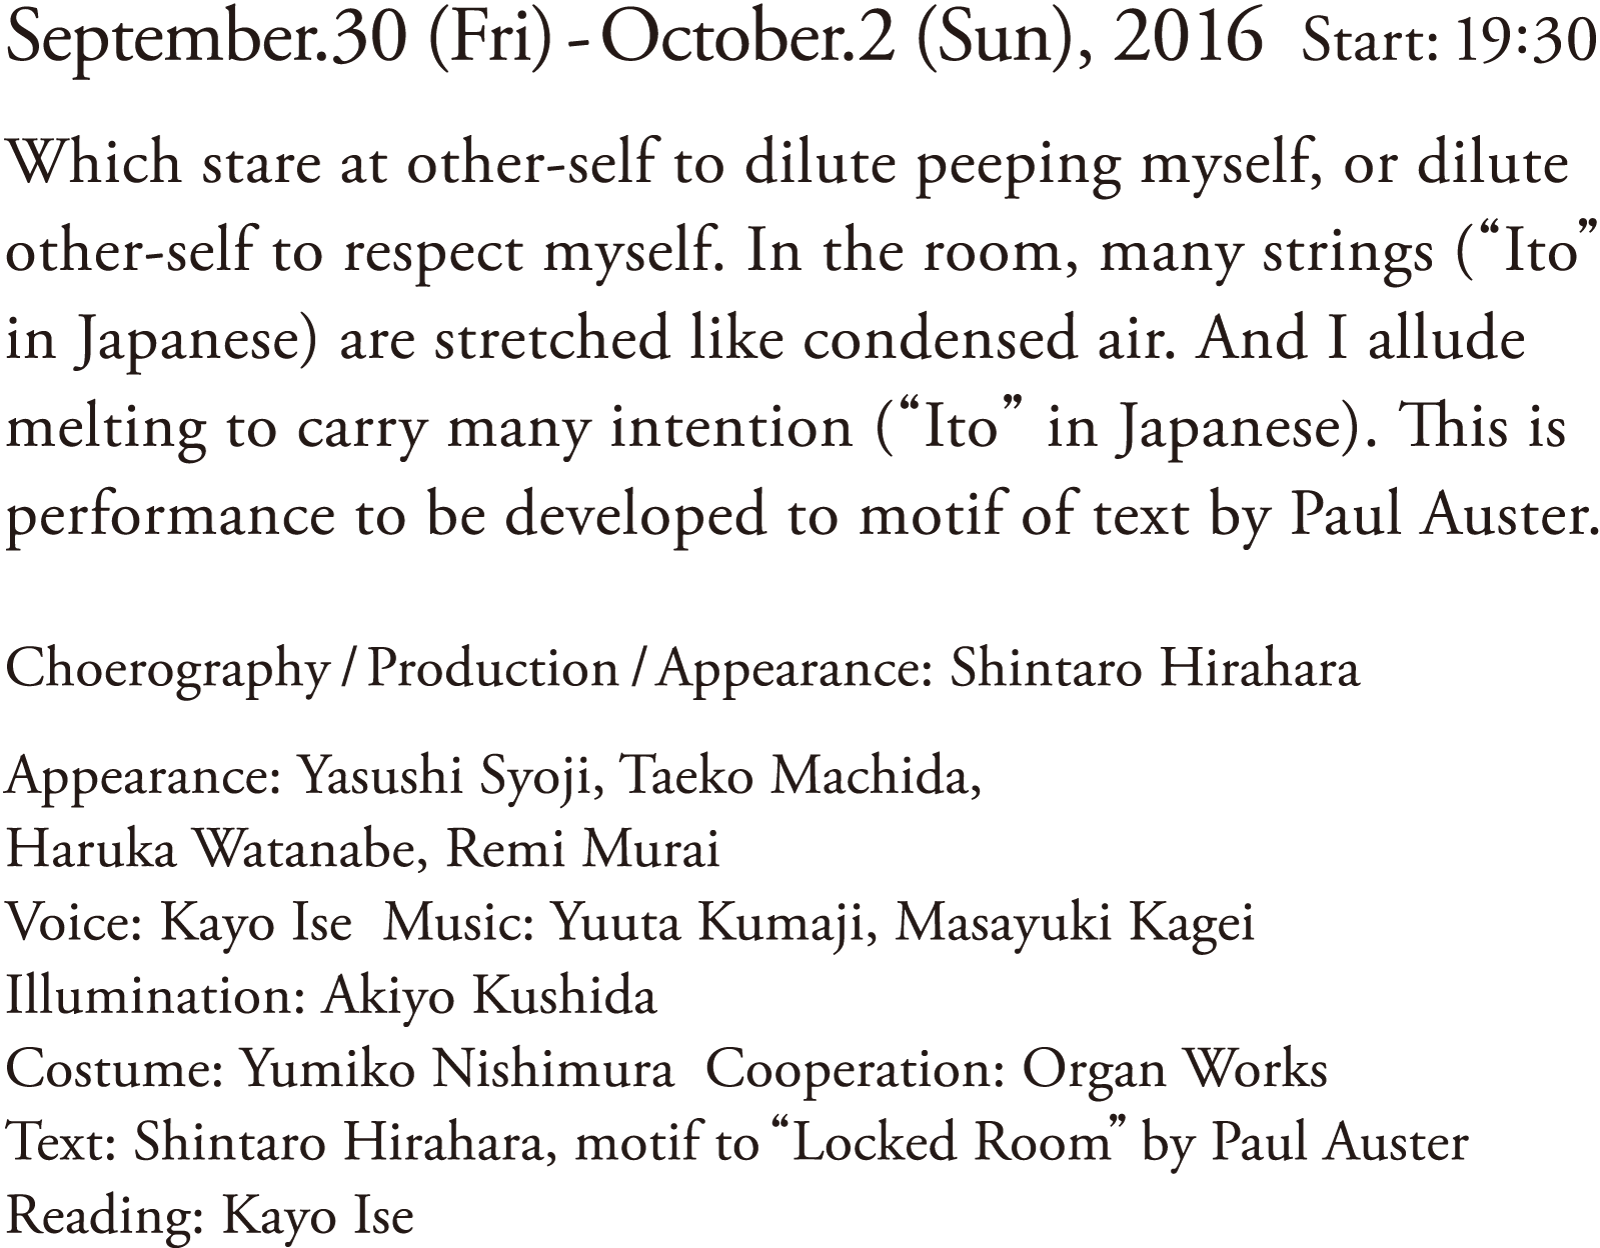 Date: September.30 (Fri) – October.2 (Sun), 2016 | Start: 19:30 | Which stare at other-self to dilute peeping myself, or dilute other-self to respect myself. In the room, many strings (“Ito” in Japanese) are stretched like condensed air. And I allude melting to carry many intention (“Ito” in Japanese). This is performance to be developed to motif of text by Paul Auster. | Choreography/Production/Appearance: Shintaro Hirahara | Appearance: Yasushi Syoji, Taeko Machida, Haruka Watanabe, Remi Murai | Voice: Kayo Ise | Music: Yuuta Kumaji, Masayuki Kagei | Illumination: Akiyo Kushida | Costume: Yumiko Nishimura | Cooperation: Organ Works | Text: Shintaro Hirahara, motif to “Locked Room” by Paul Auster | Reading: Kayo Ise